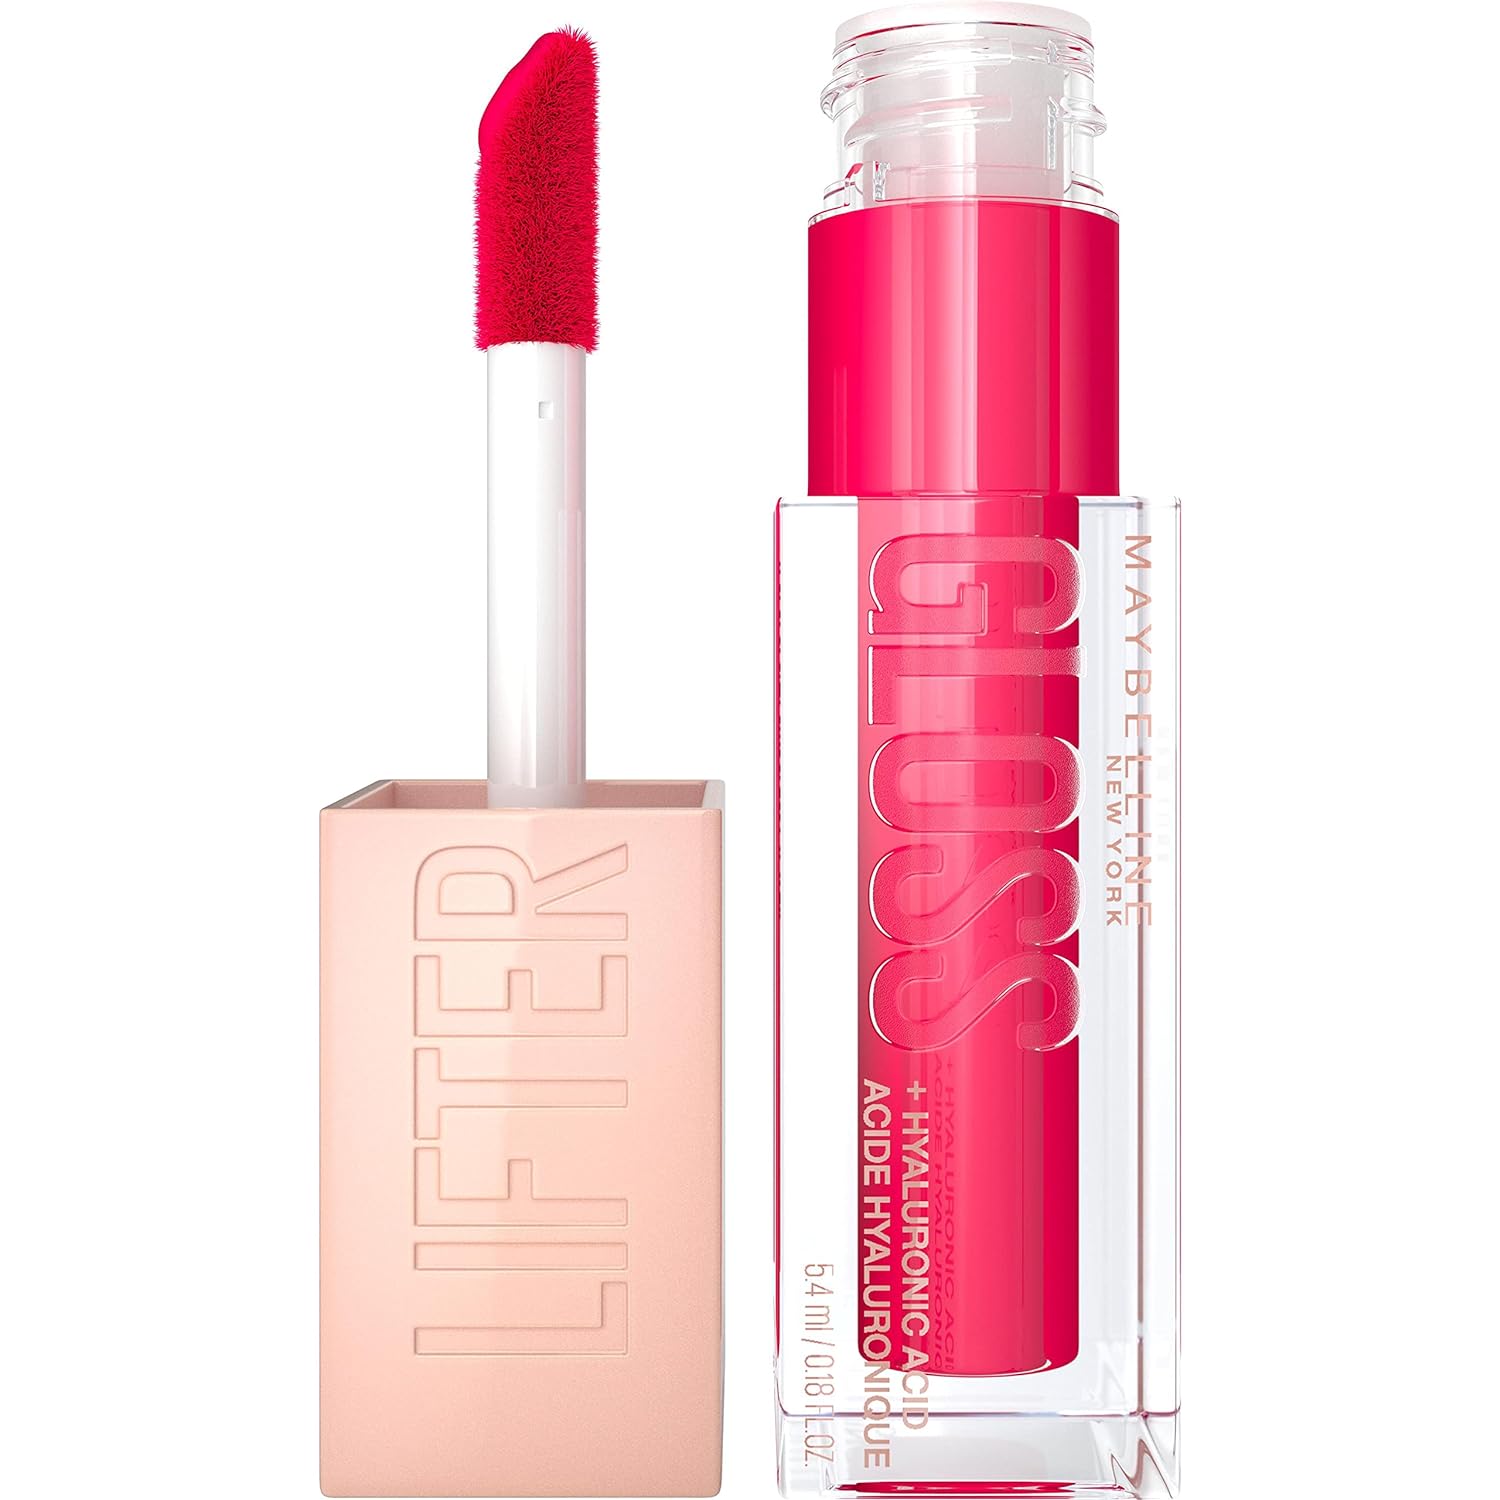 Maybelline New York Shiny Lip Gloss for Full-Like Lips, Moisturising, with Hyaluronic Acid, Lifter Gloss Candy Drop, Color: No.024 Bubblegum (pink), 1 x 5.4 ml